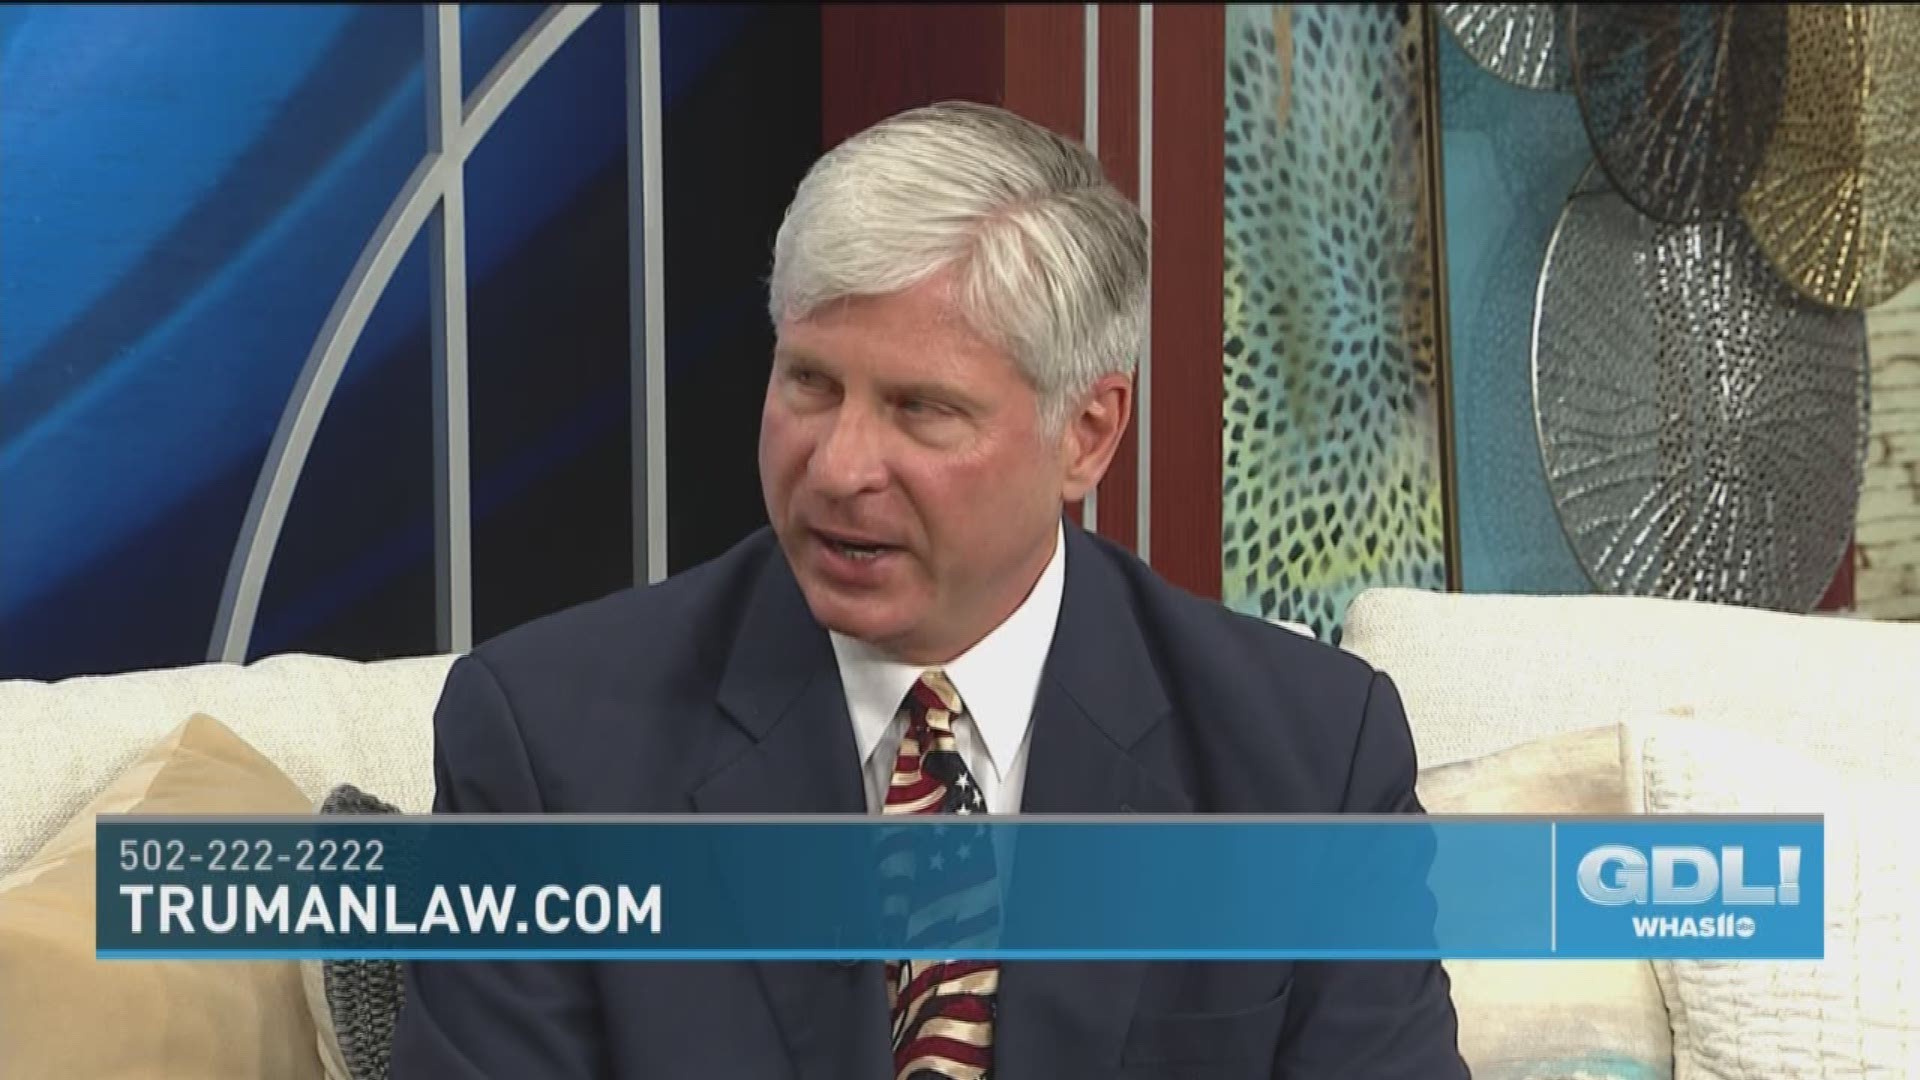 Attorney and author Karl Truman joined us on GDL to talk about the myths to personal injury and what you should avoid after an accident that will help keep your case intact.